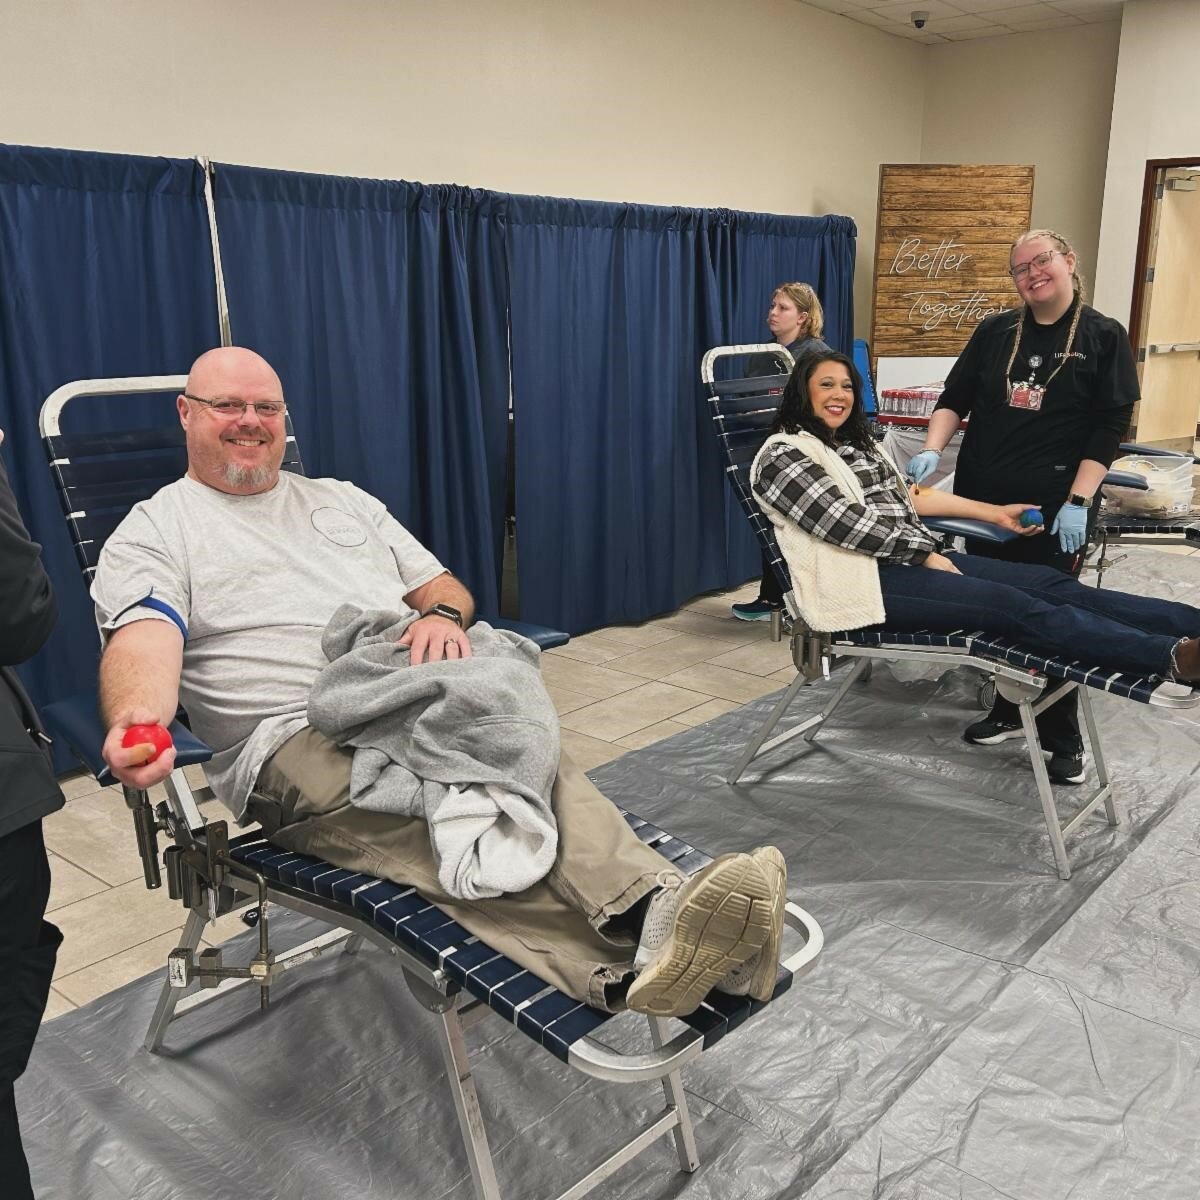 With 105 pints of blood collected, as many as 315 lives could potentially be saved through local community members' contributions.